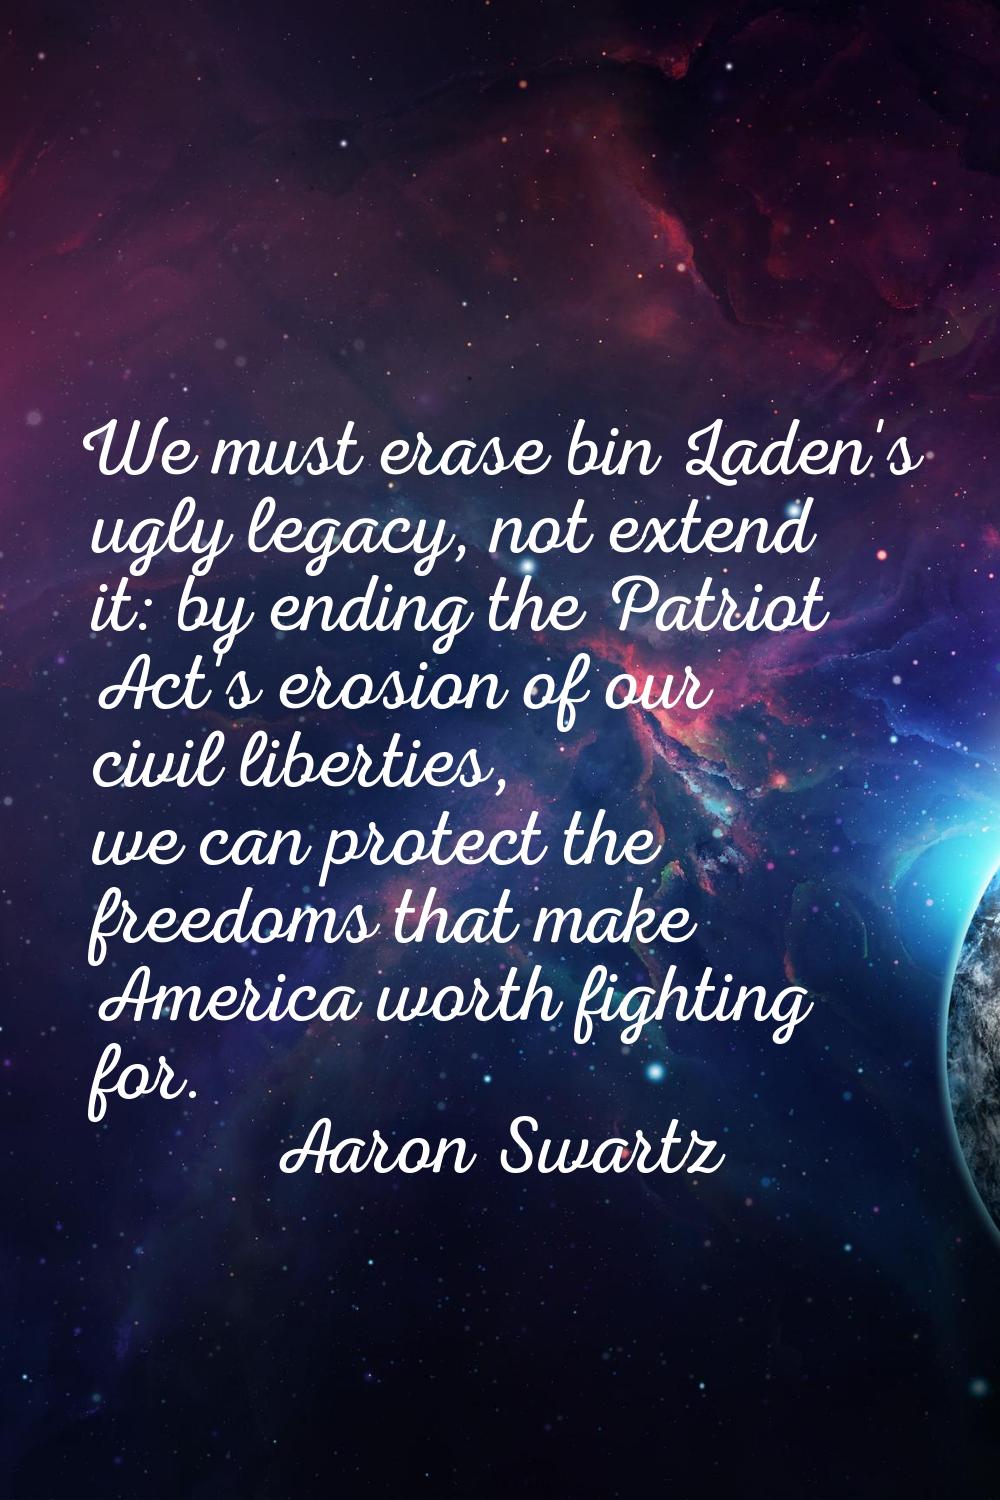 We must erase bin Laden's ugly legacy, not extend it: by ending the Patriot Act's erosion of our ci